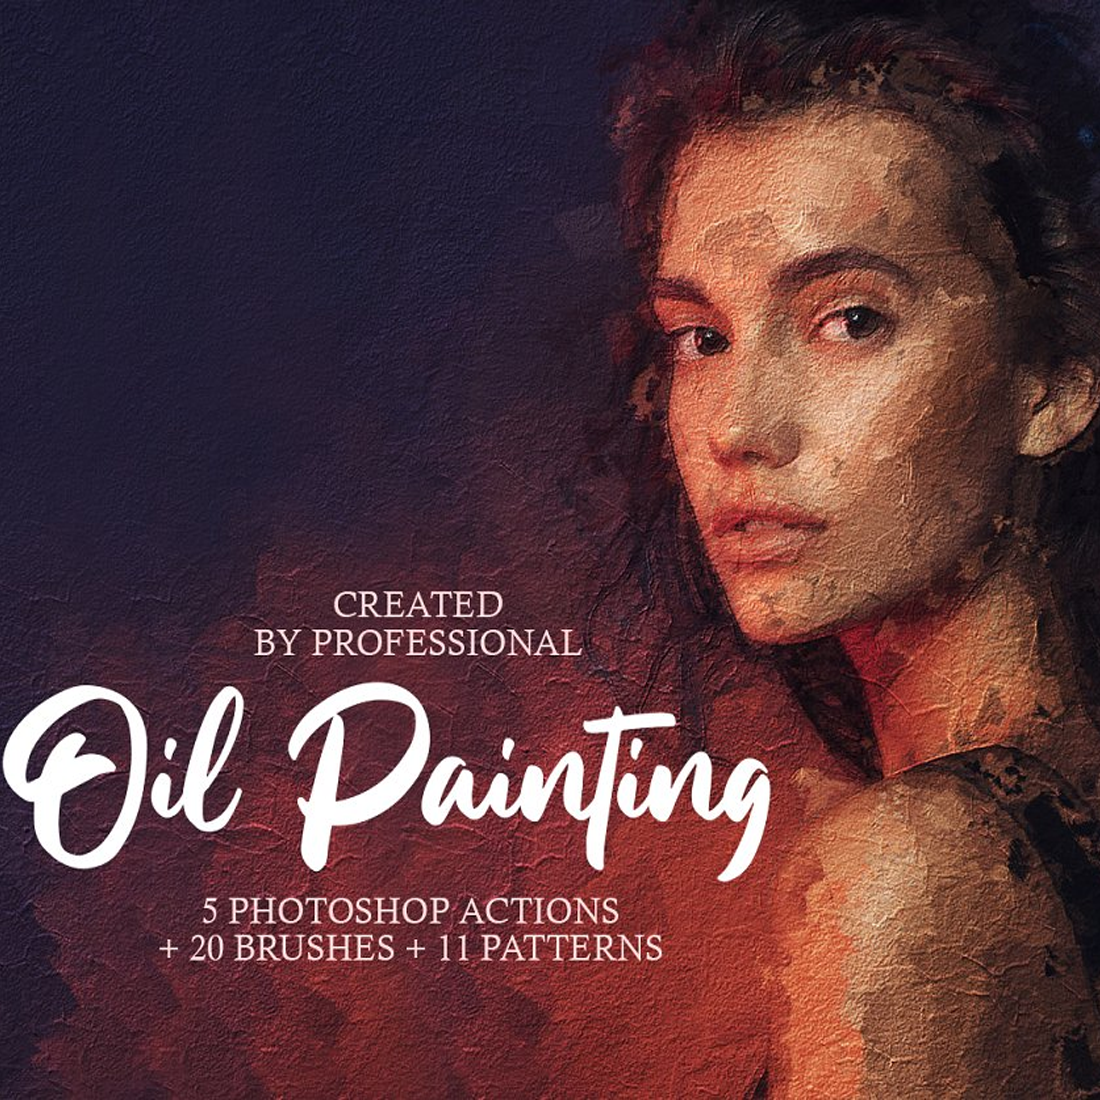 Preview oil painting photoshop actions.